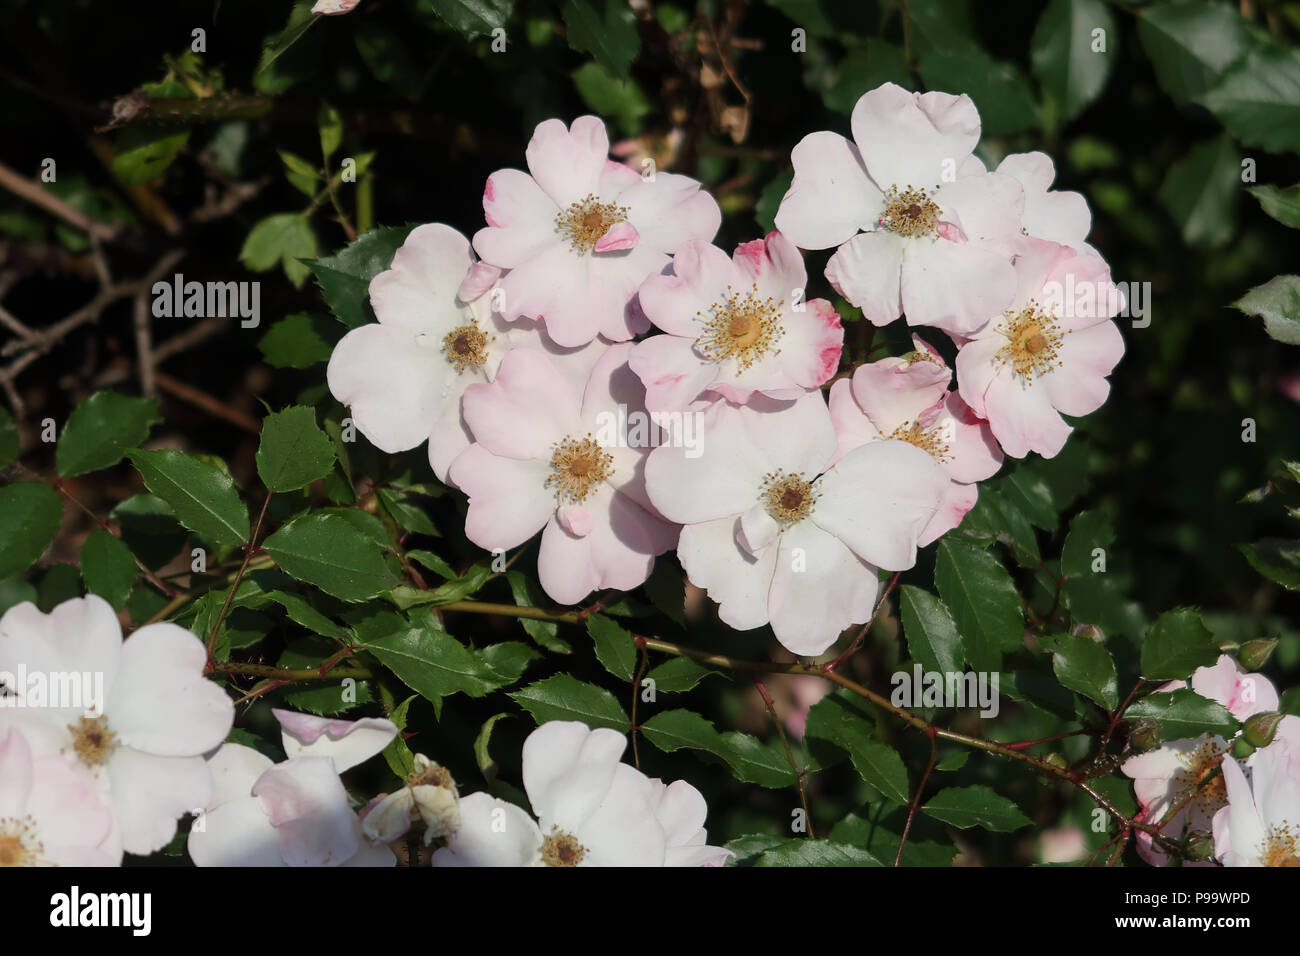 A small bunch of beautiful pink and white wild roses Stock Photo